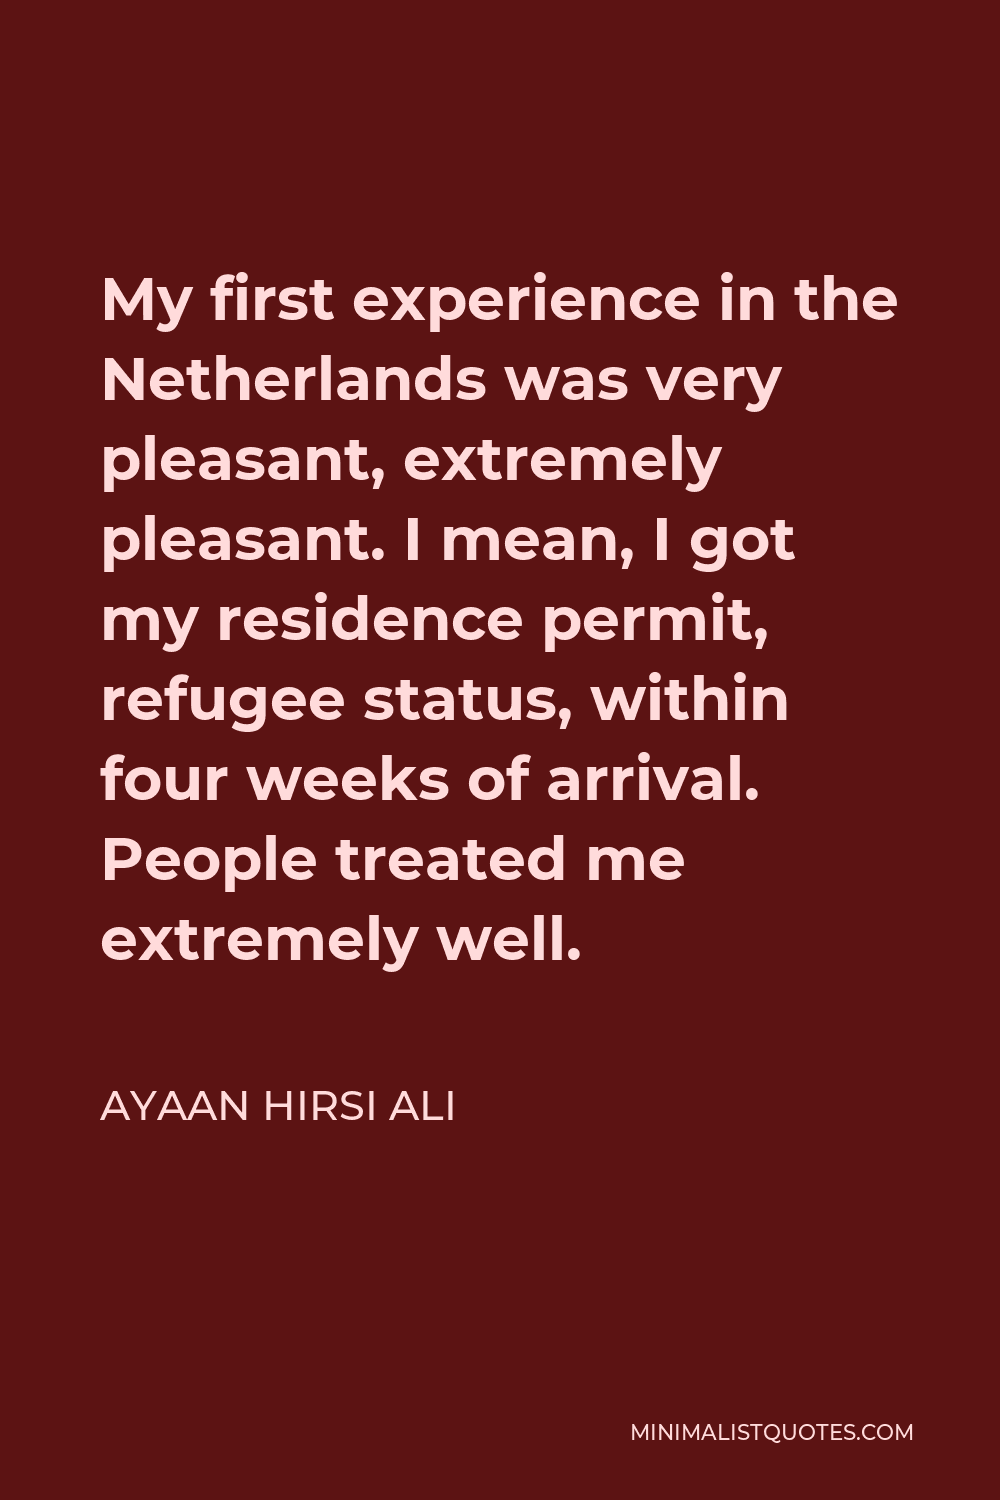 Ayaan Hirsi Ali Quote - My first experience in the Netherlands was very pleasant, extremely pleasant. I mean, I got my residence permit, refugee status, within four weeks of arrival. People treated me extremely well.